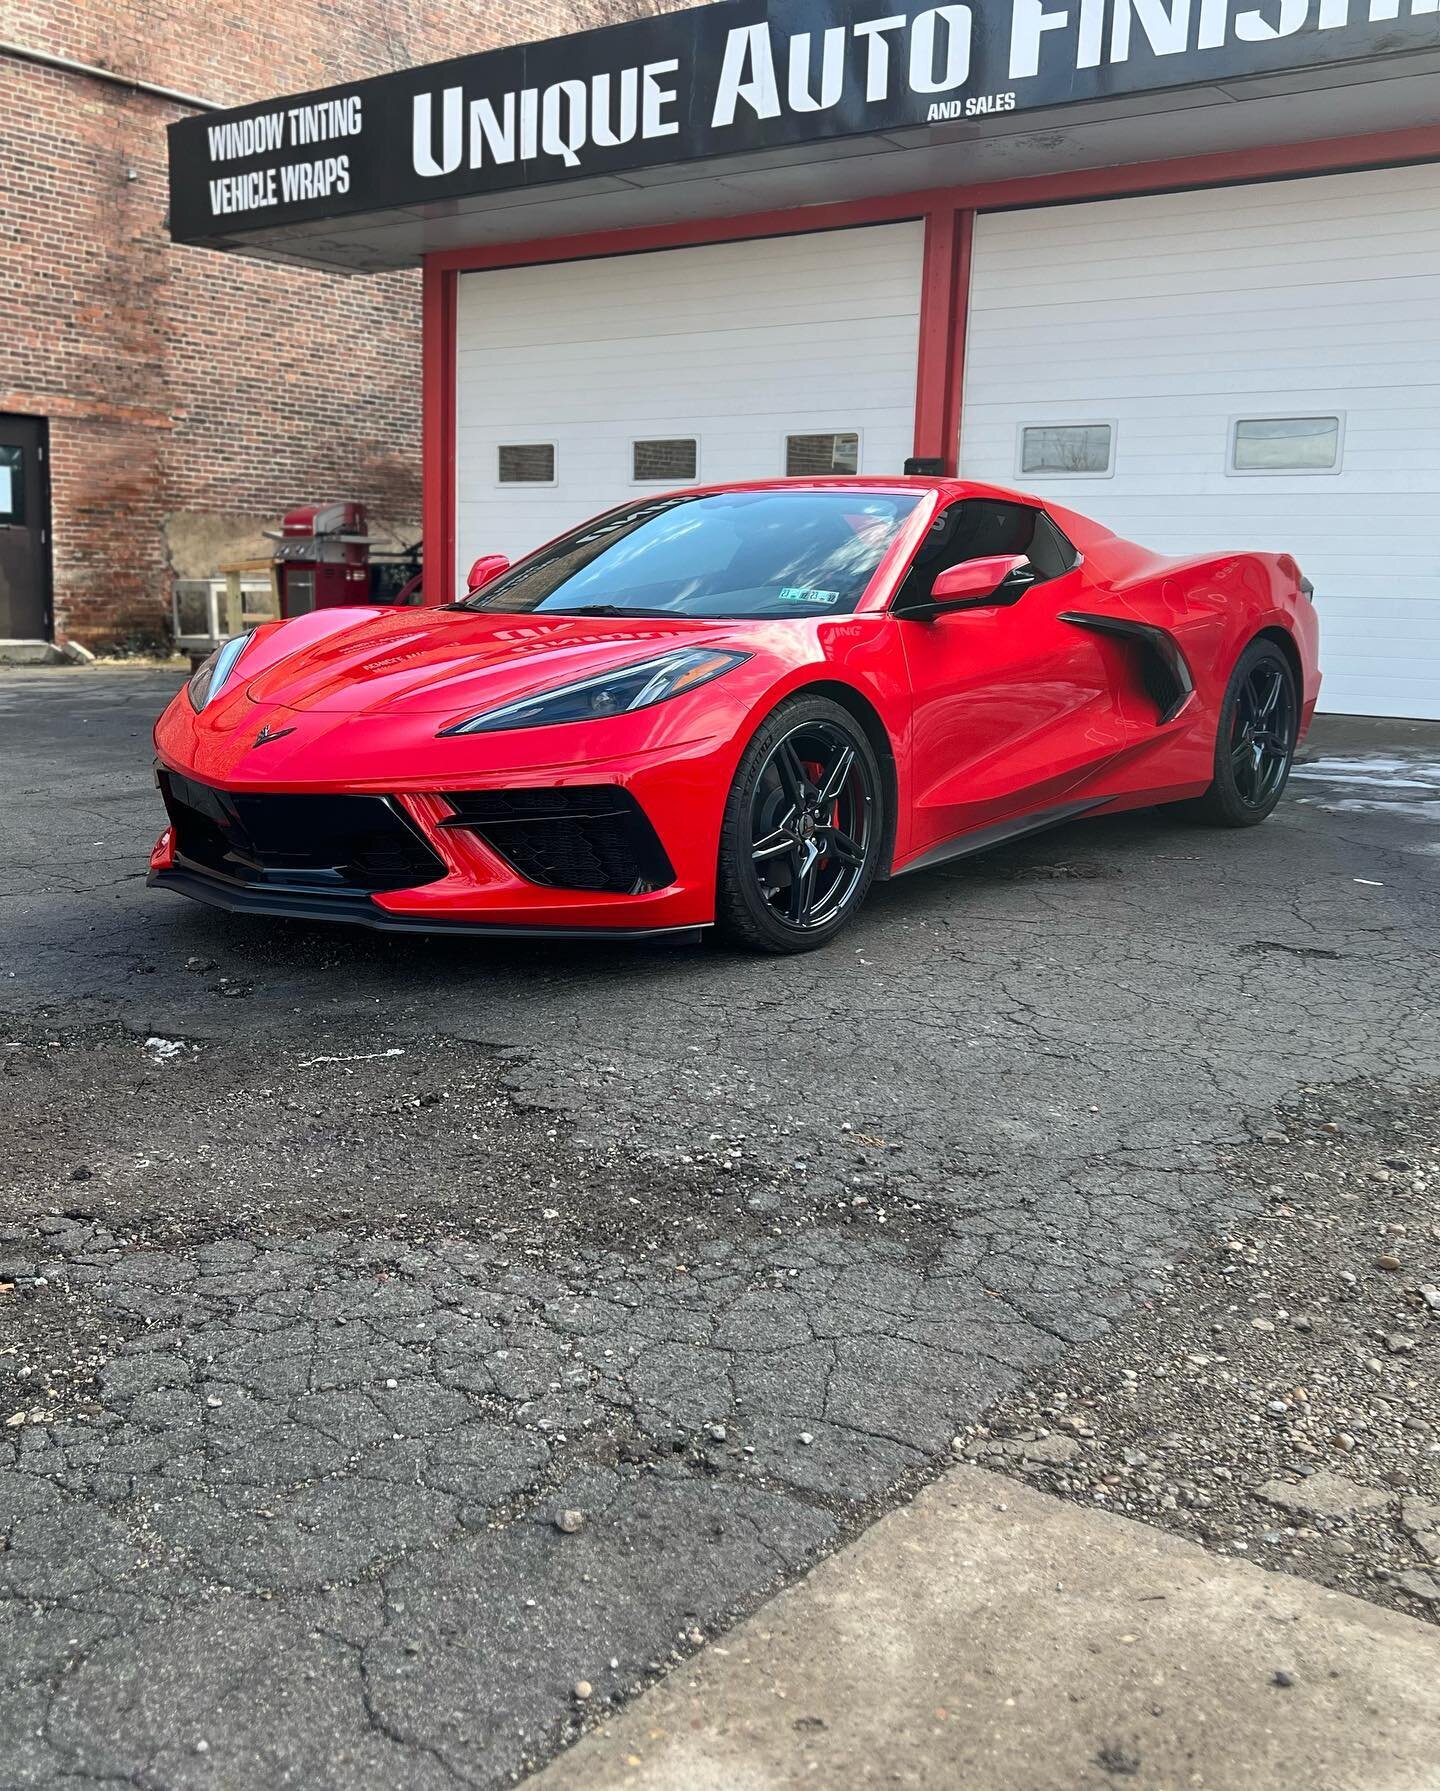 We added some nice finishing touches in hotrod red vinyl to this C8&rsquo;s frunk. #chevrolet #c8stingray #uniqueautofinishing